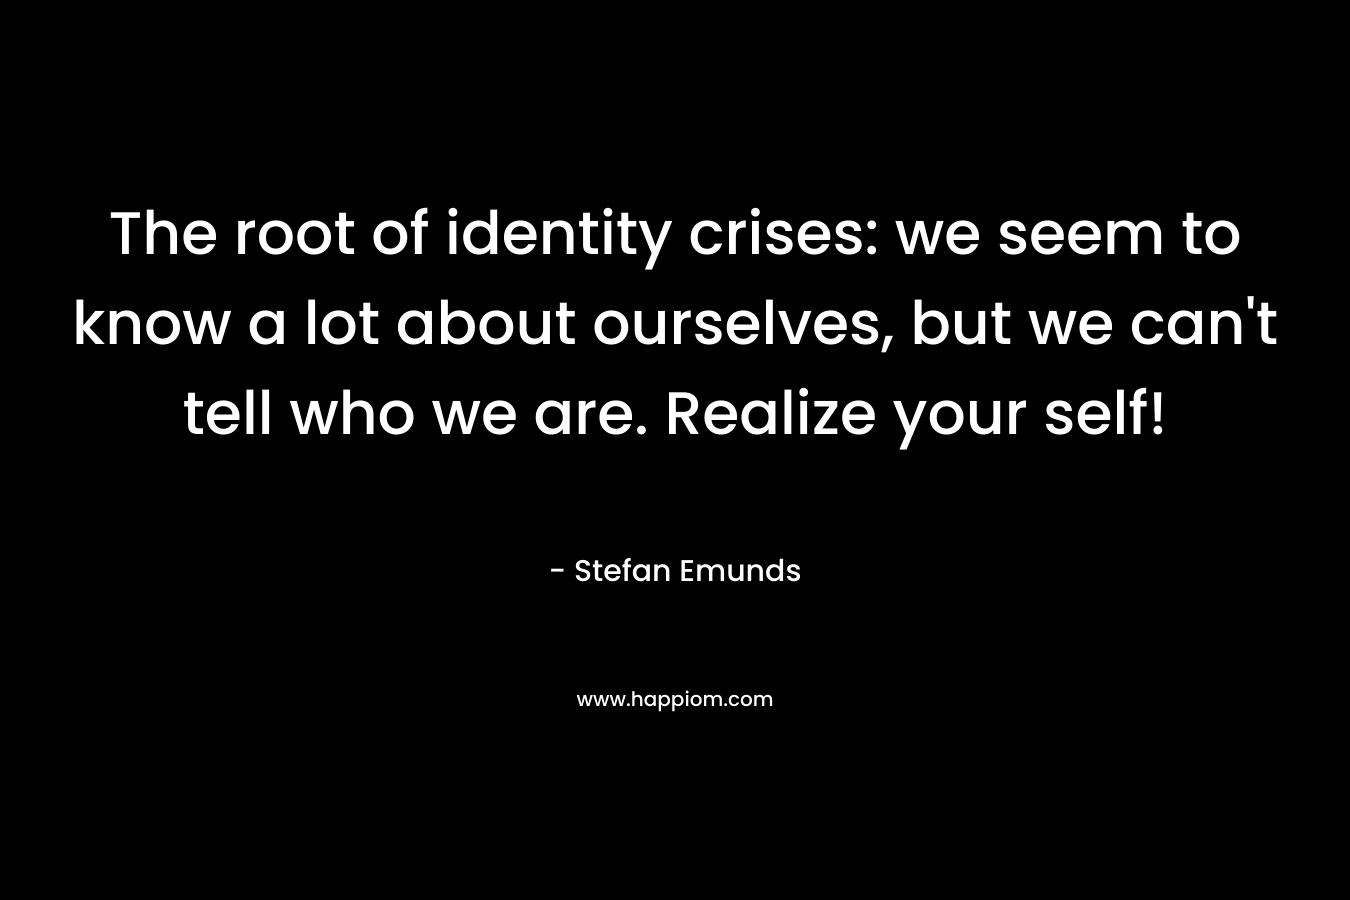 The root of identity crises: we seem to know a lot about ourselves, but we can’t tell who we are. Realize your self! – Stefan Emunds